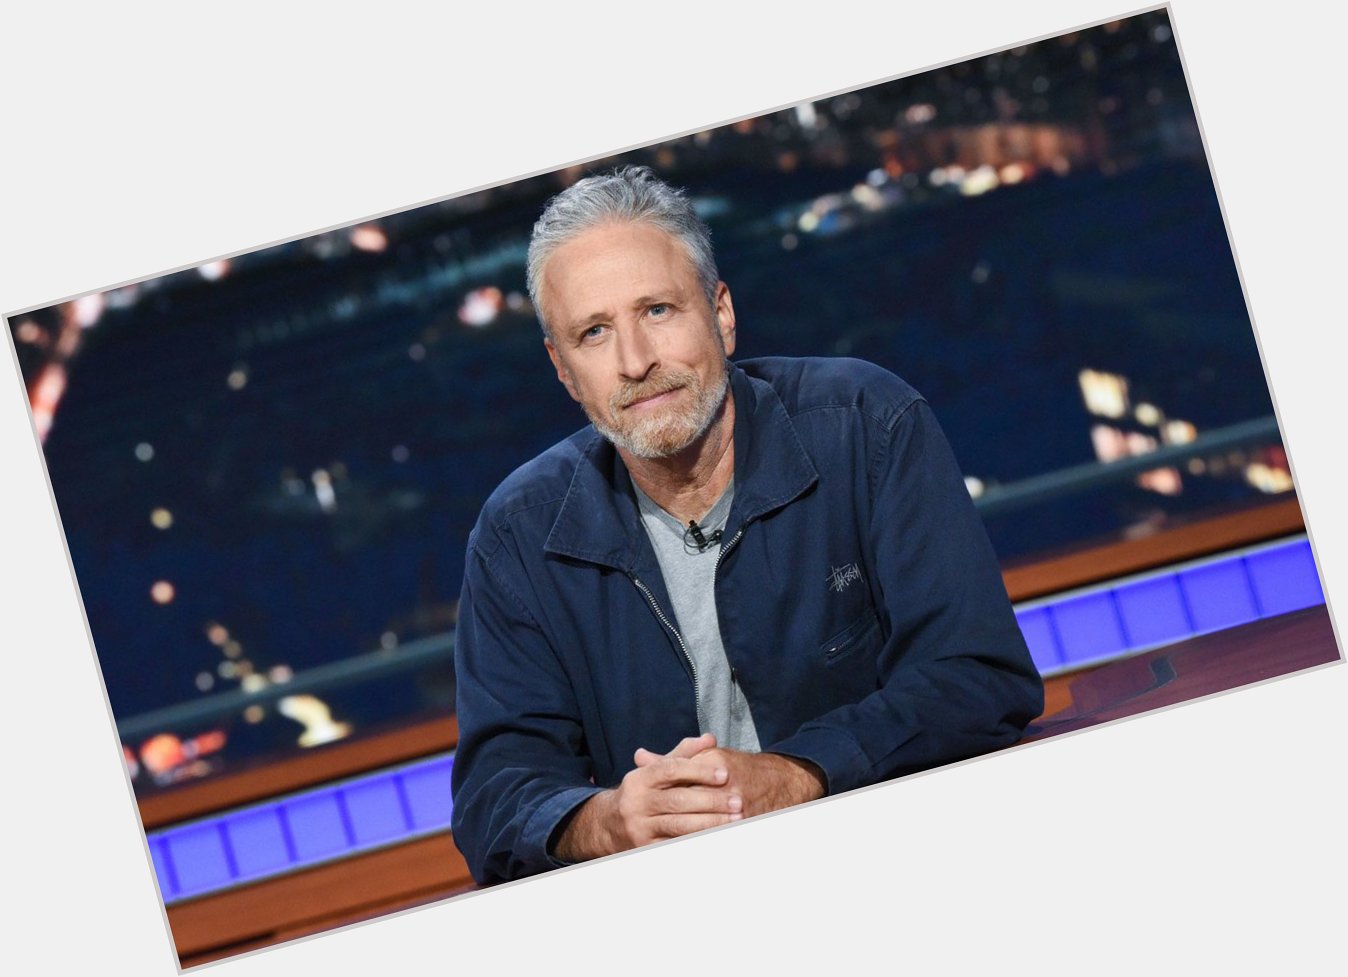 Happy Birthday to American comedian, writer, producer and television host Jon Stewart born on November 28, 1962 